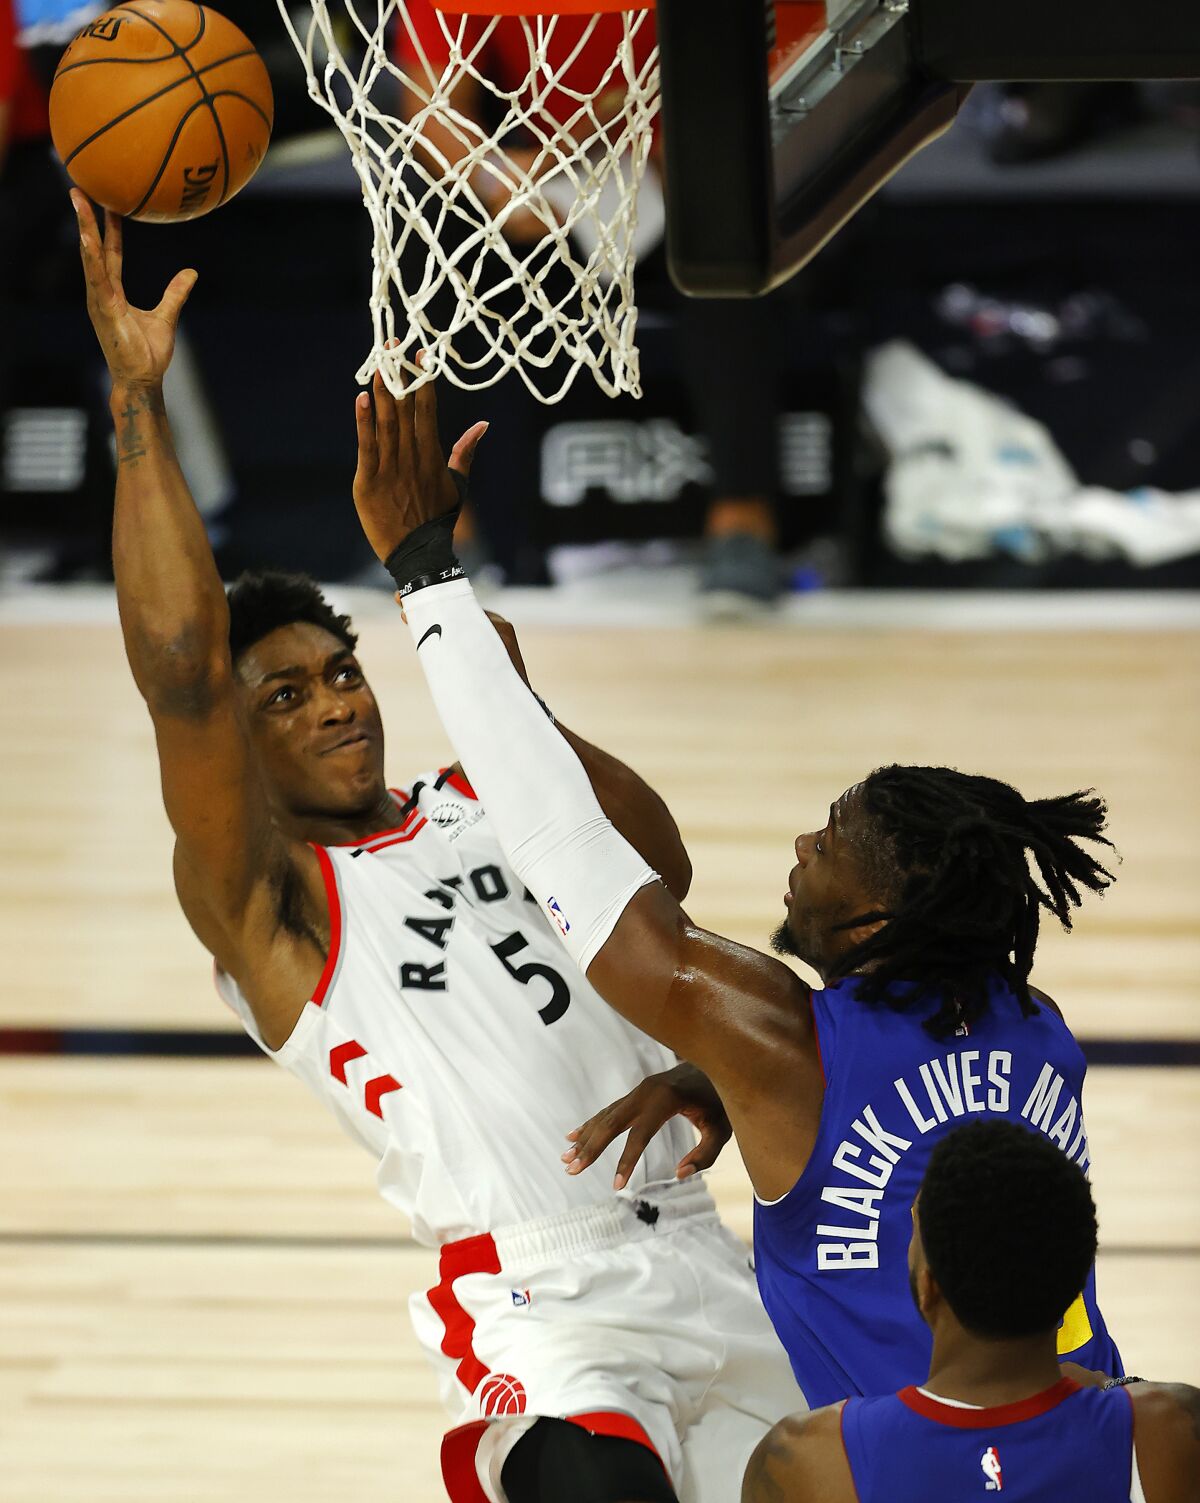 Toronto Raptors' Stanley Johnson (5) drives to the basket against Denver Nuggets' Tyler Cook (25) during the fourth quarter of an NBA basketball game Friday, Aug. 14, 2020, in Lake Buena Vista, Fla. (Mike Ehrmann/Pool Photo via AP)